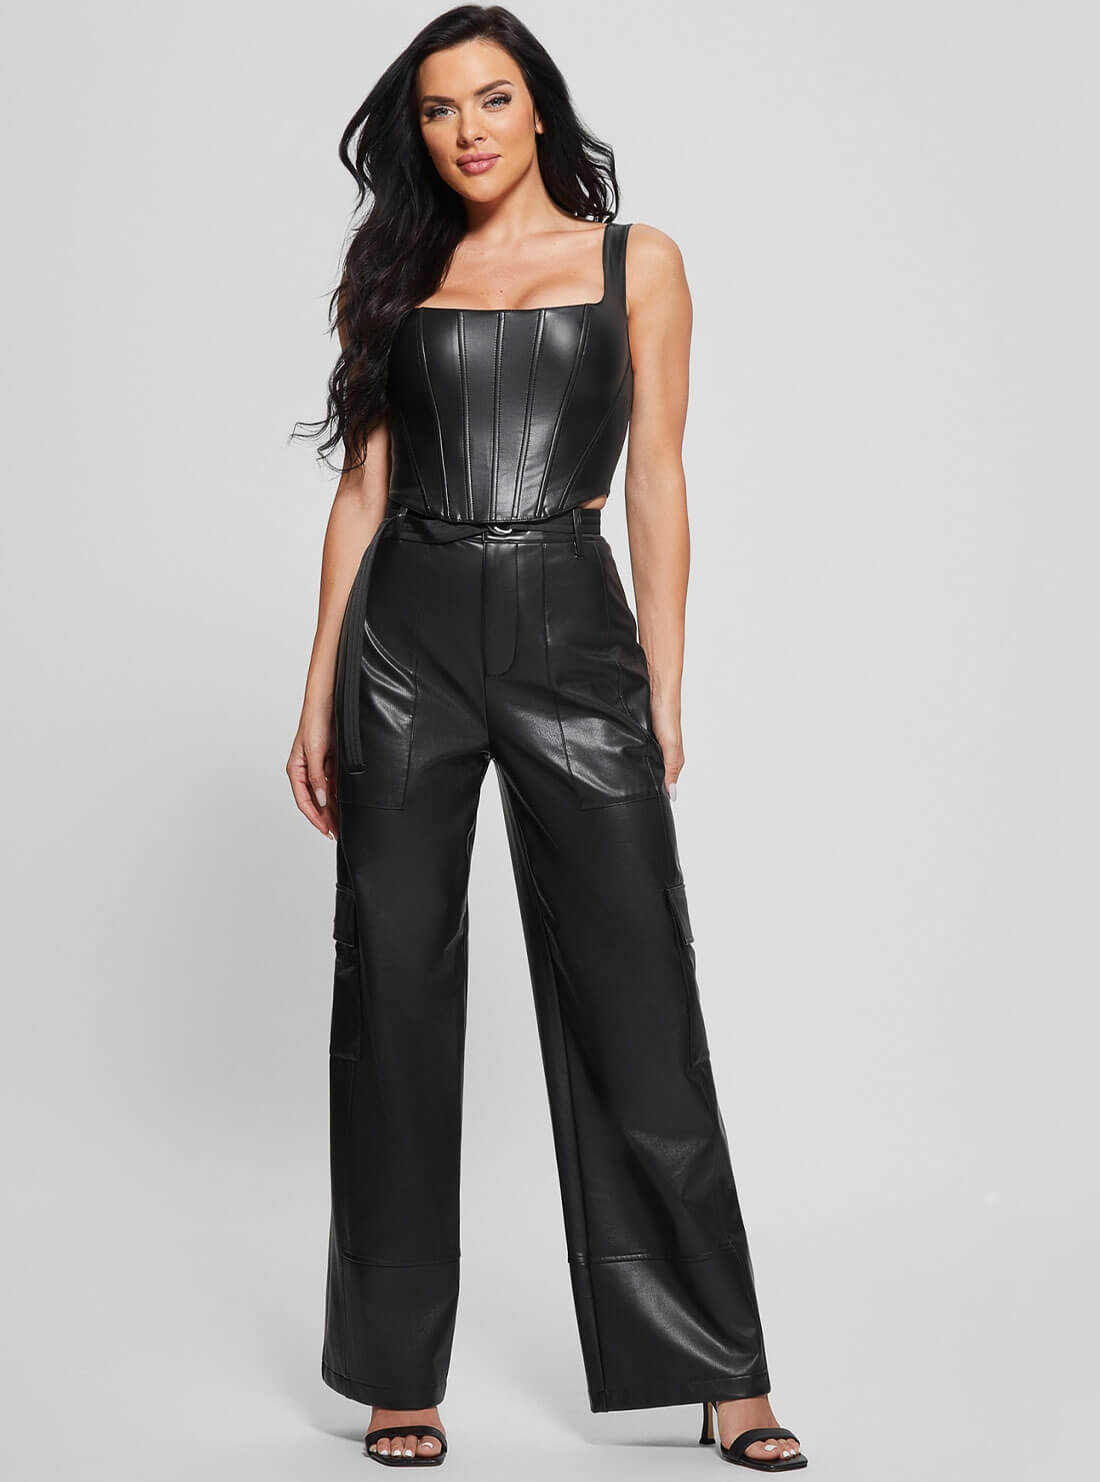 Black Gwen Leather Cargo Pants | GUESS Women's Apparel | full view